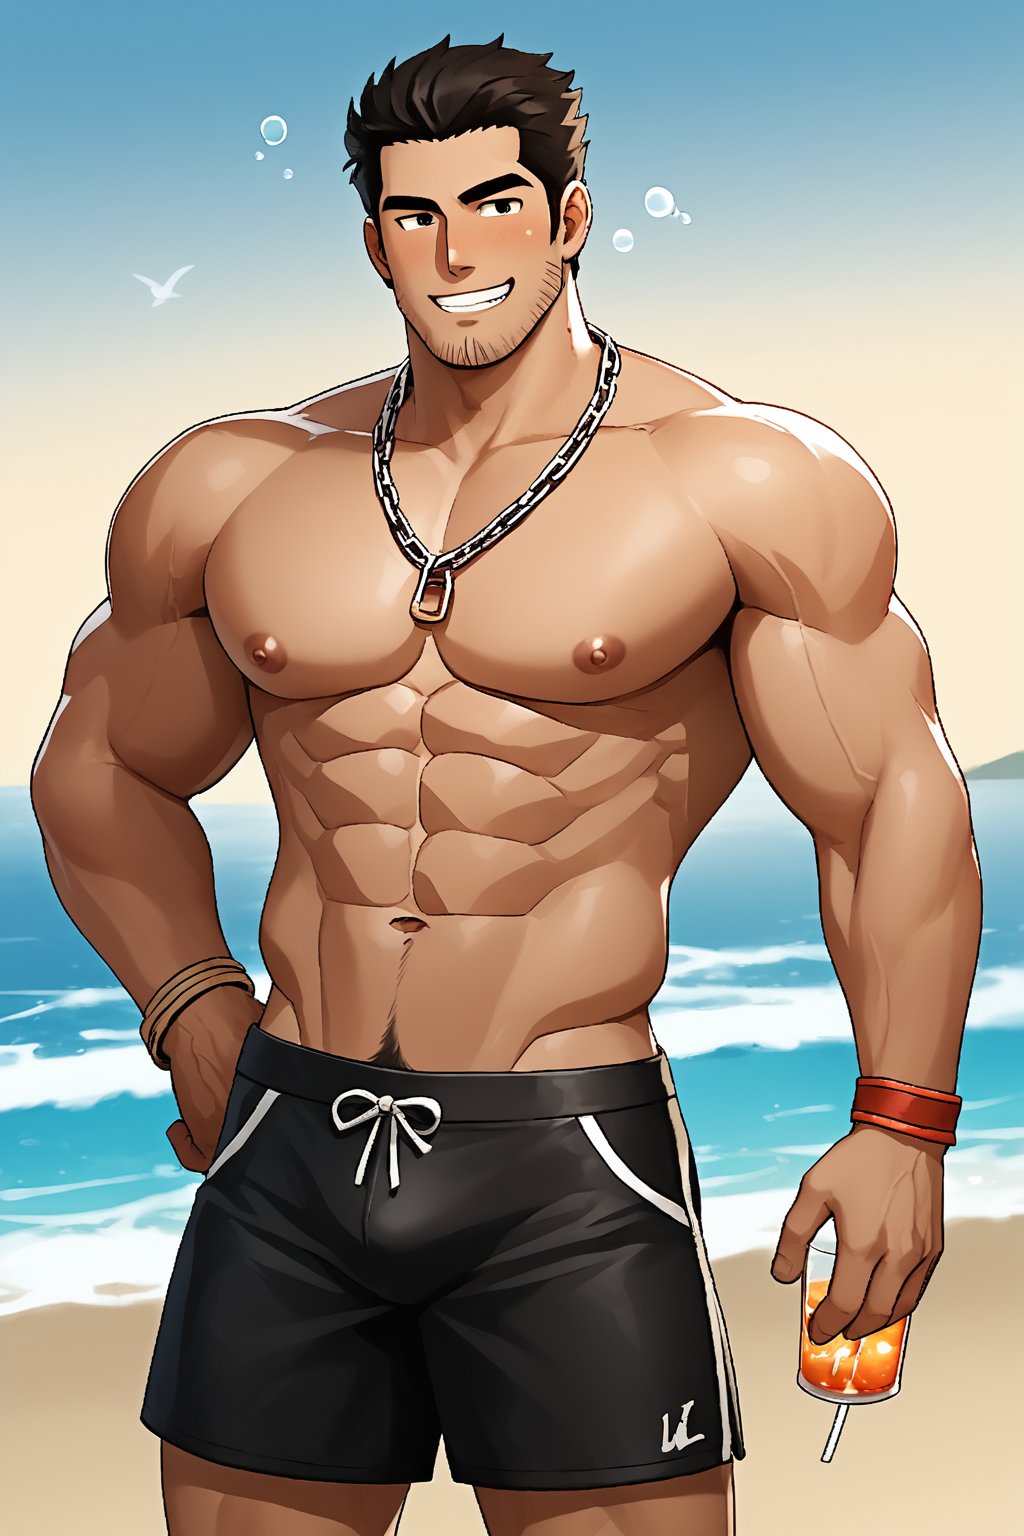 SCORE_9, SCORE_8_UP, 1BOY, MATURE MALE, MALE BEACHSHORTS ON, NECKCHAIN, OUTDOORS AT BEACH BAR, SKY, DRINK, BLUSHES, DRUNK, MUSCULAR, SHORT HAIR, CHEERS, BUBBLES, TRULYEVIL GRIN FOR FUN, HANDSOME, INTRICATE EYES, MANLY MALE, 3D, CEL-SHADING, SOURCE_ANIME, BEACH, OCEAN, VIVID, ALIVE, RATING_QUESTIONABLE, RATING_VERYRETARDED ,Lucas_Lee